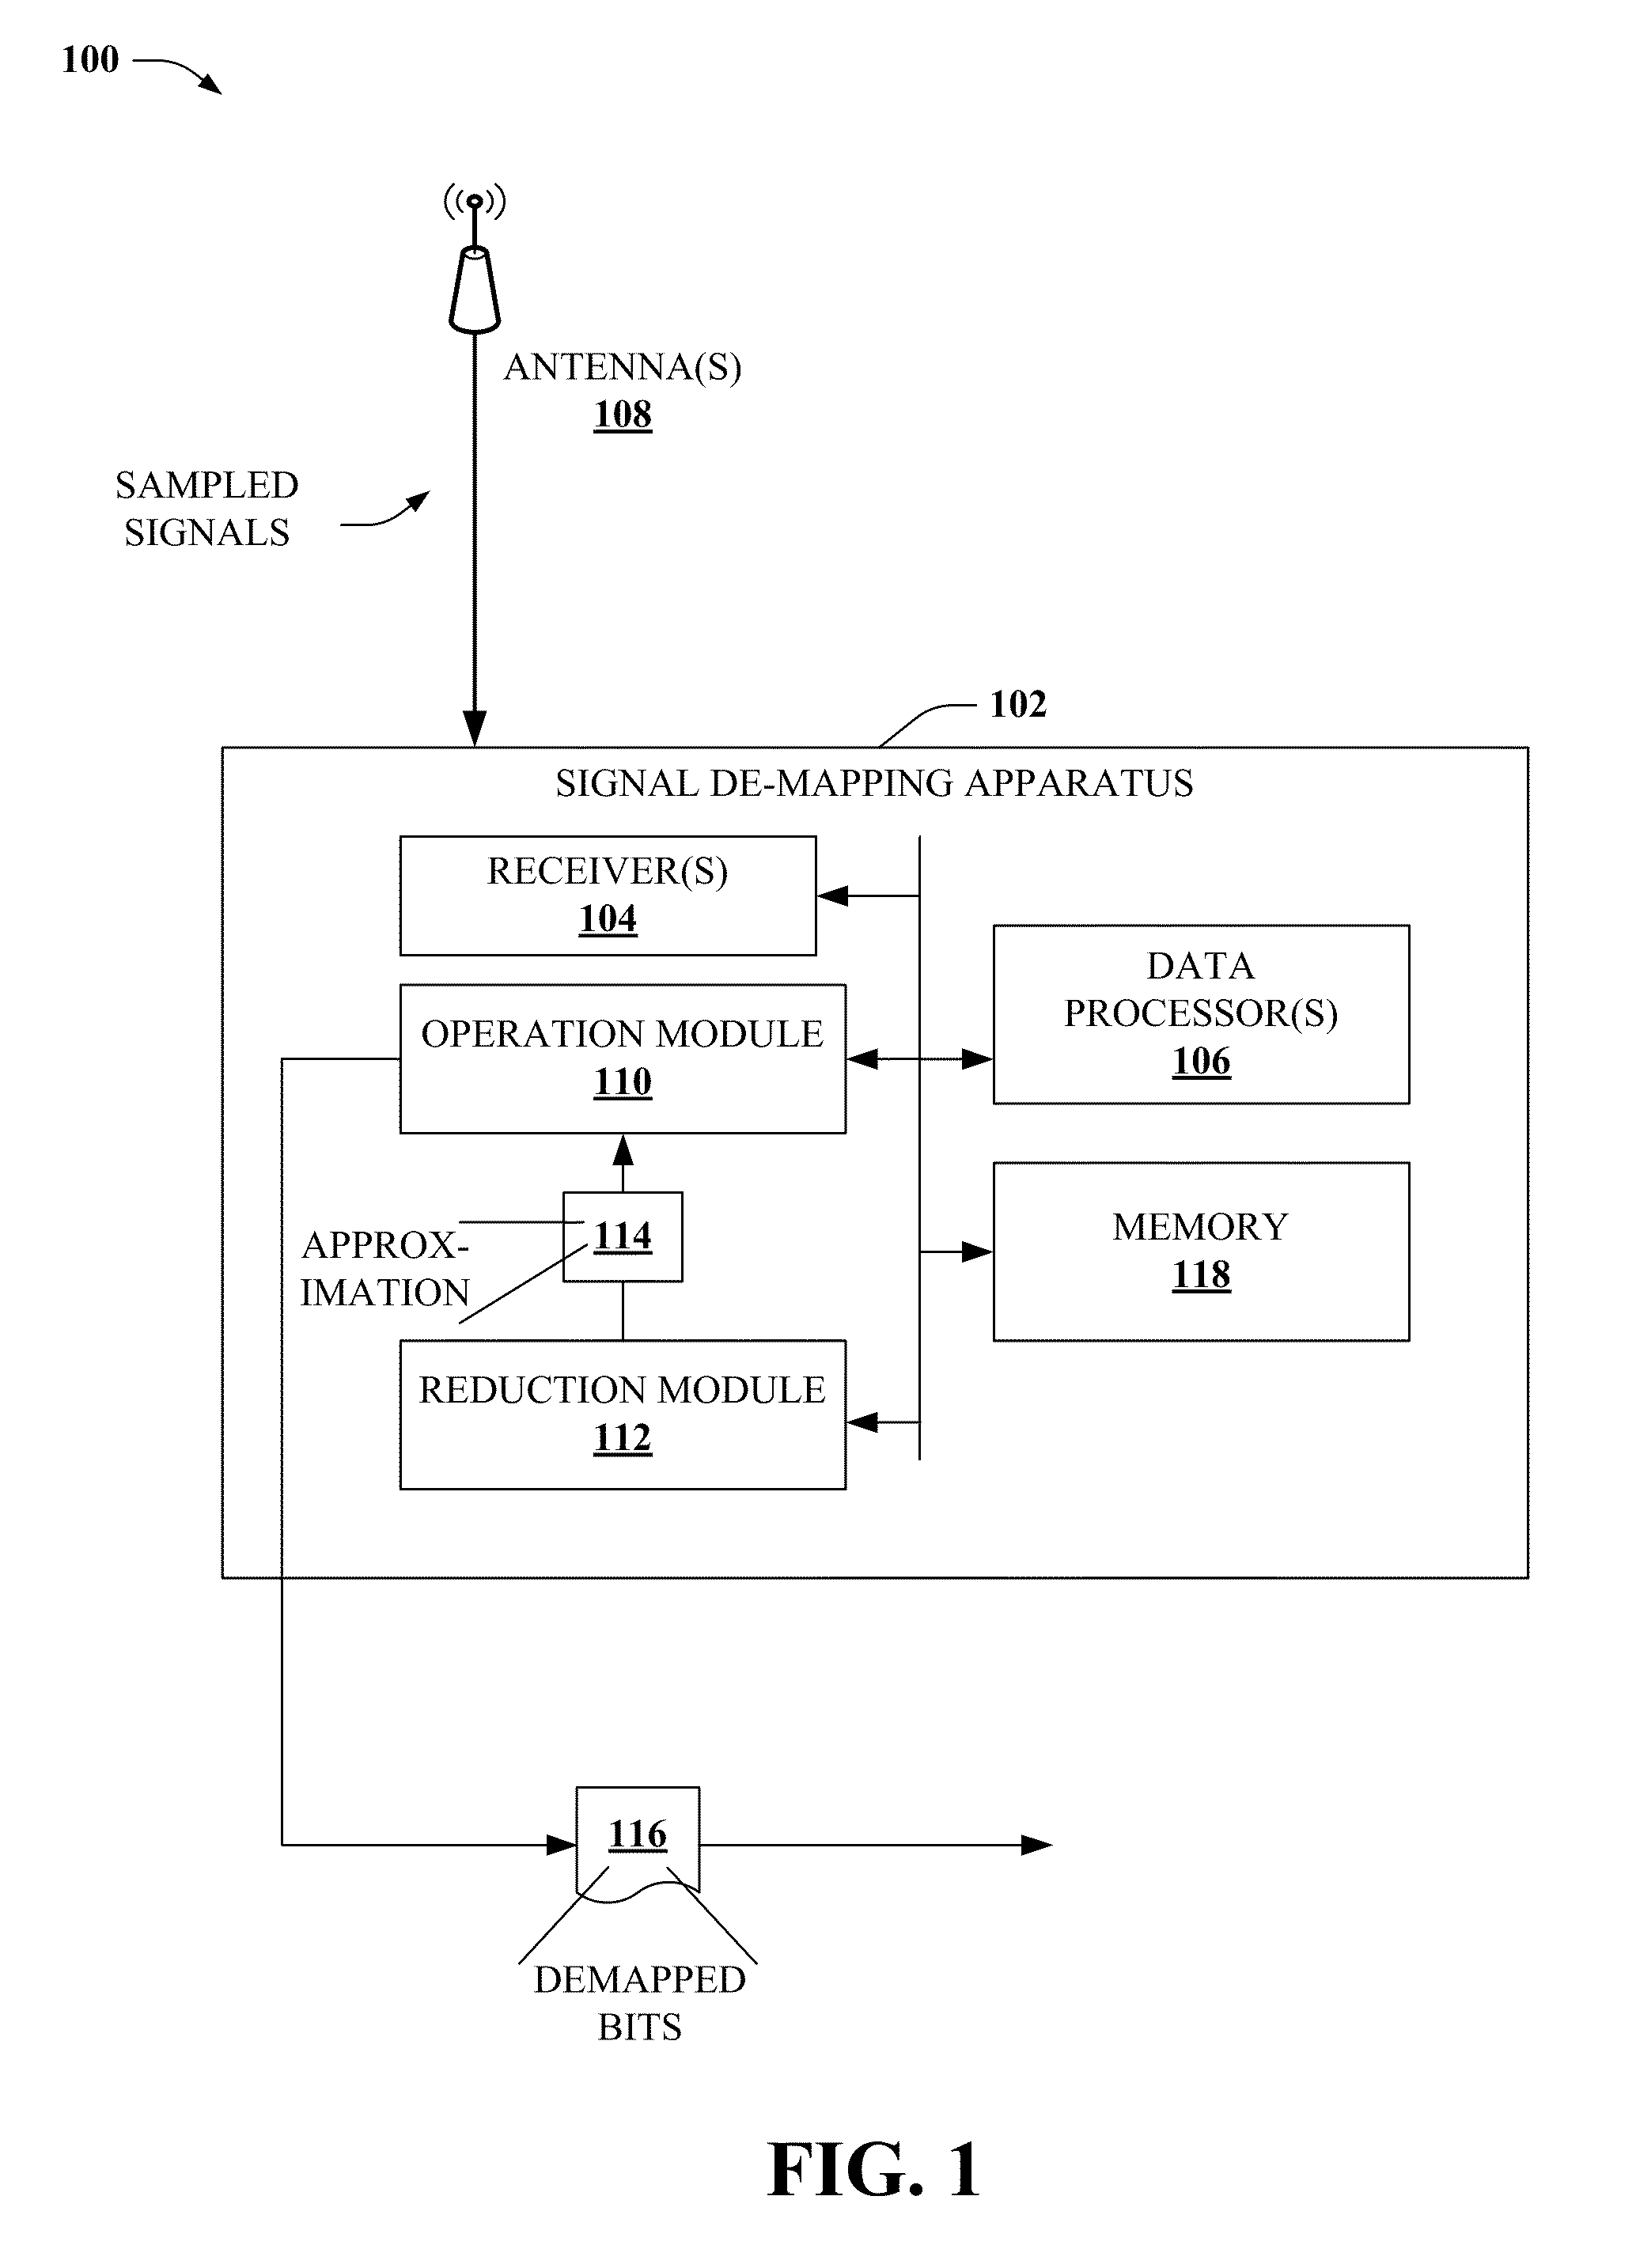 Multi-term demapping for multi-channel wireless communication